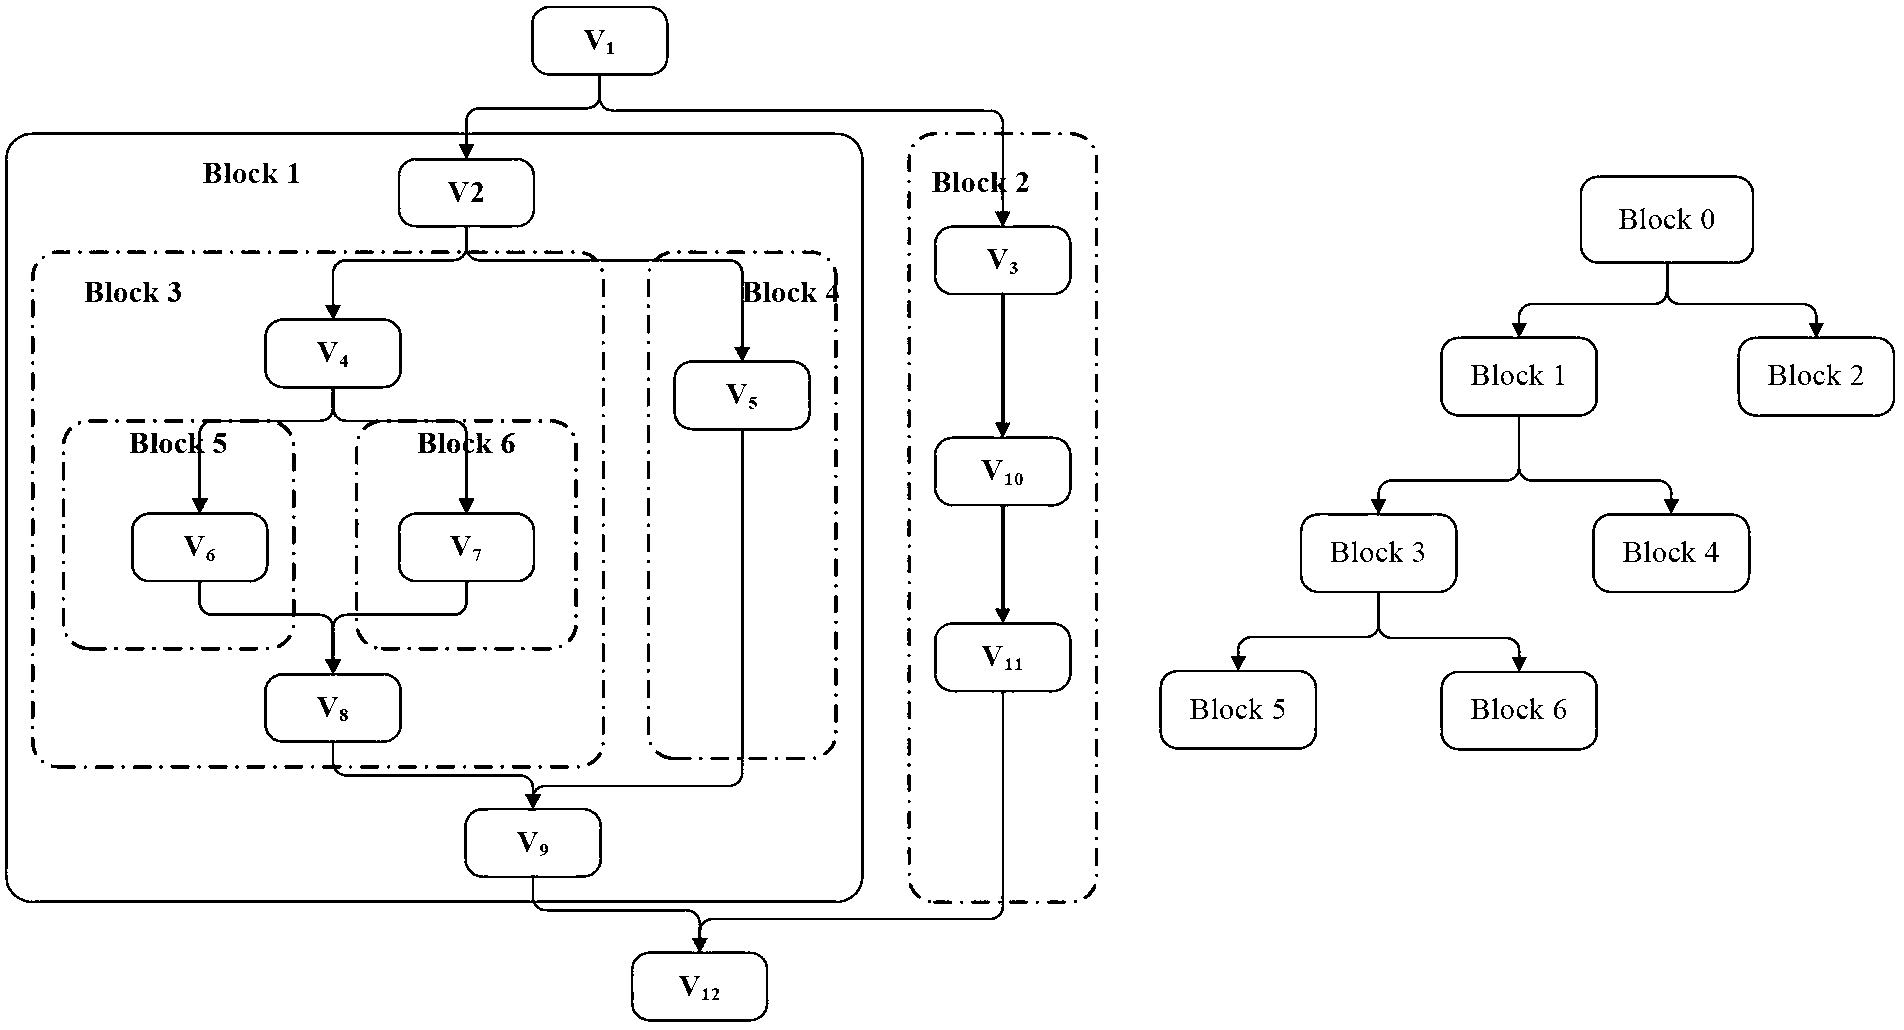 Parallel operation flow anomaly detection method oriented to data model